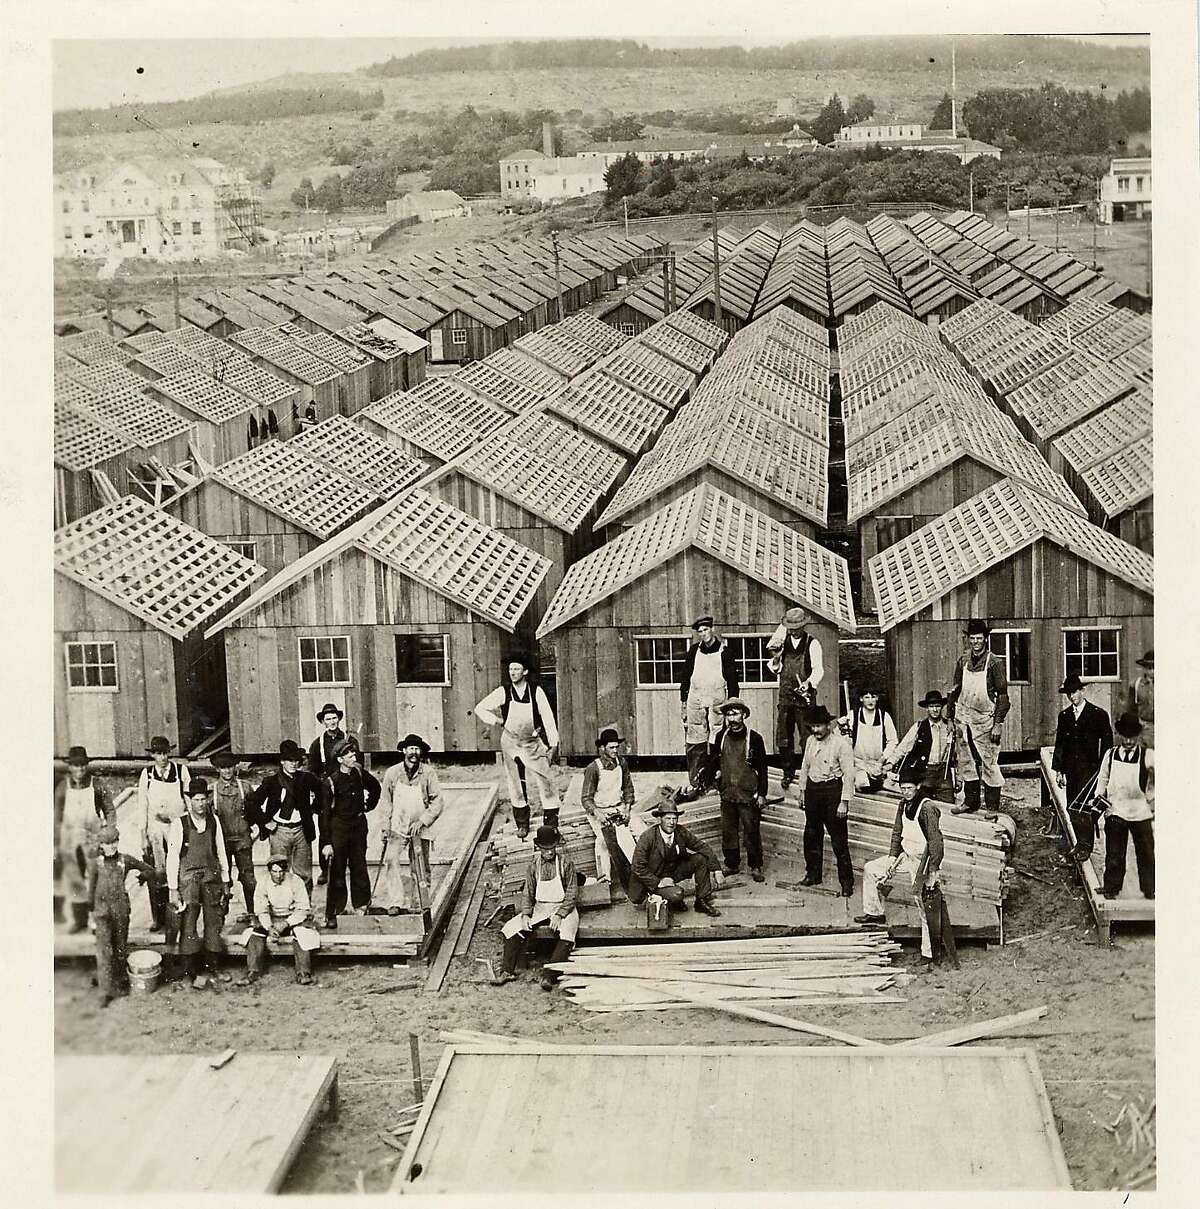 Earthquake refugee shacks in Precita Park in 1906Ran on: 03-30-2006 Shacks constructed by union carpenters for earthquake refugees stand in Precita Park in 1906.